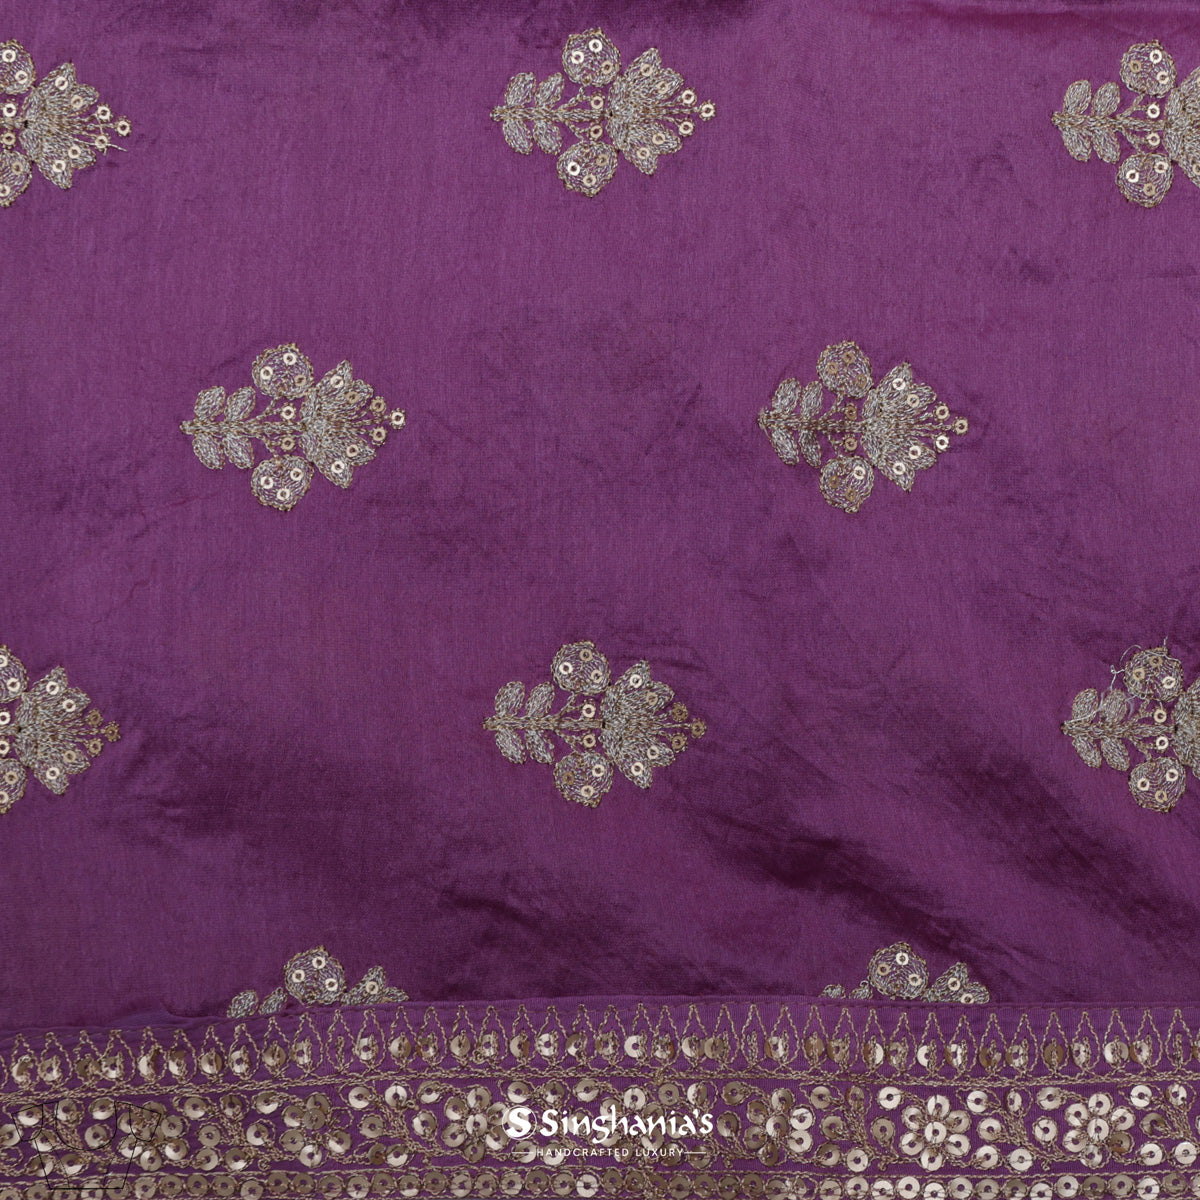 Pastel Lavender Printed Organza Saree With Embroidered Border